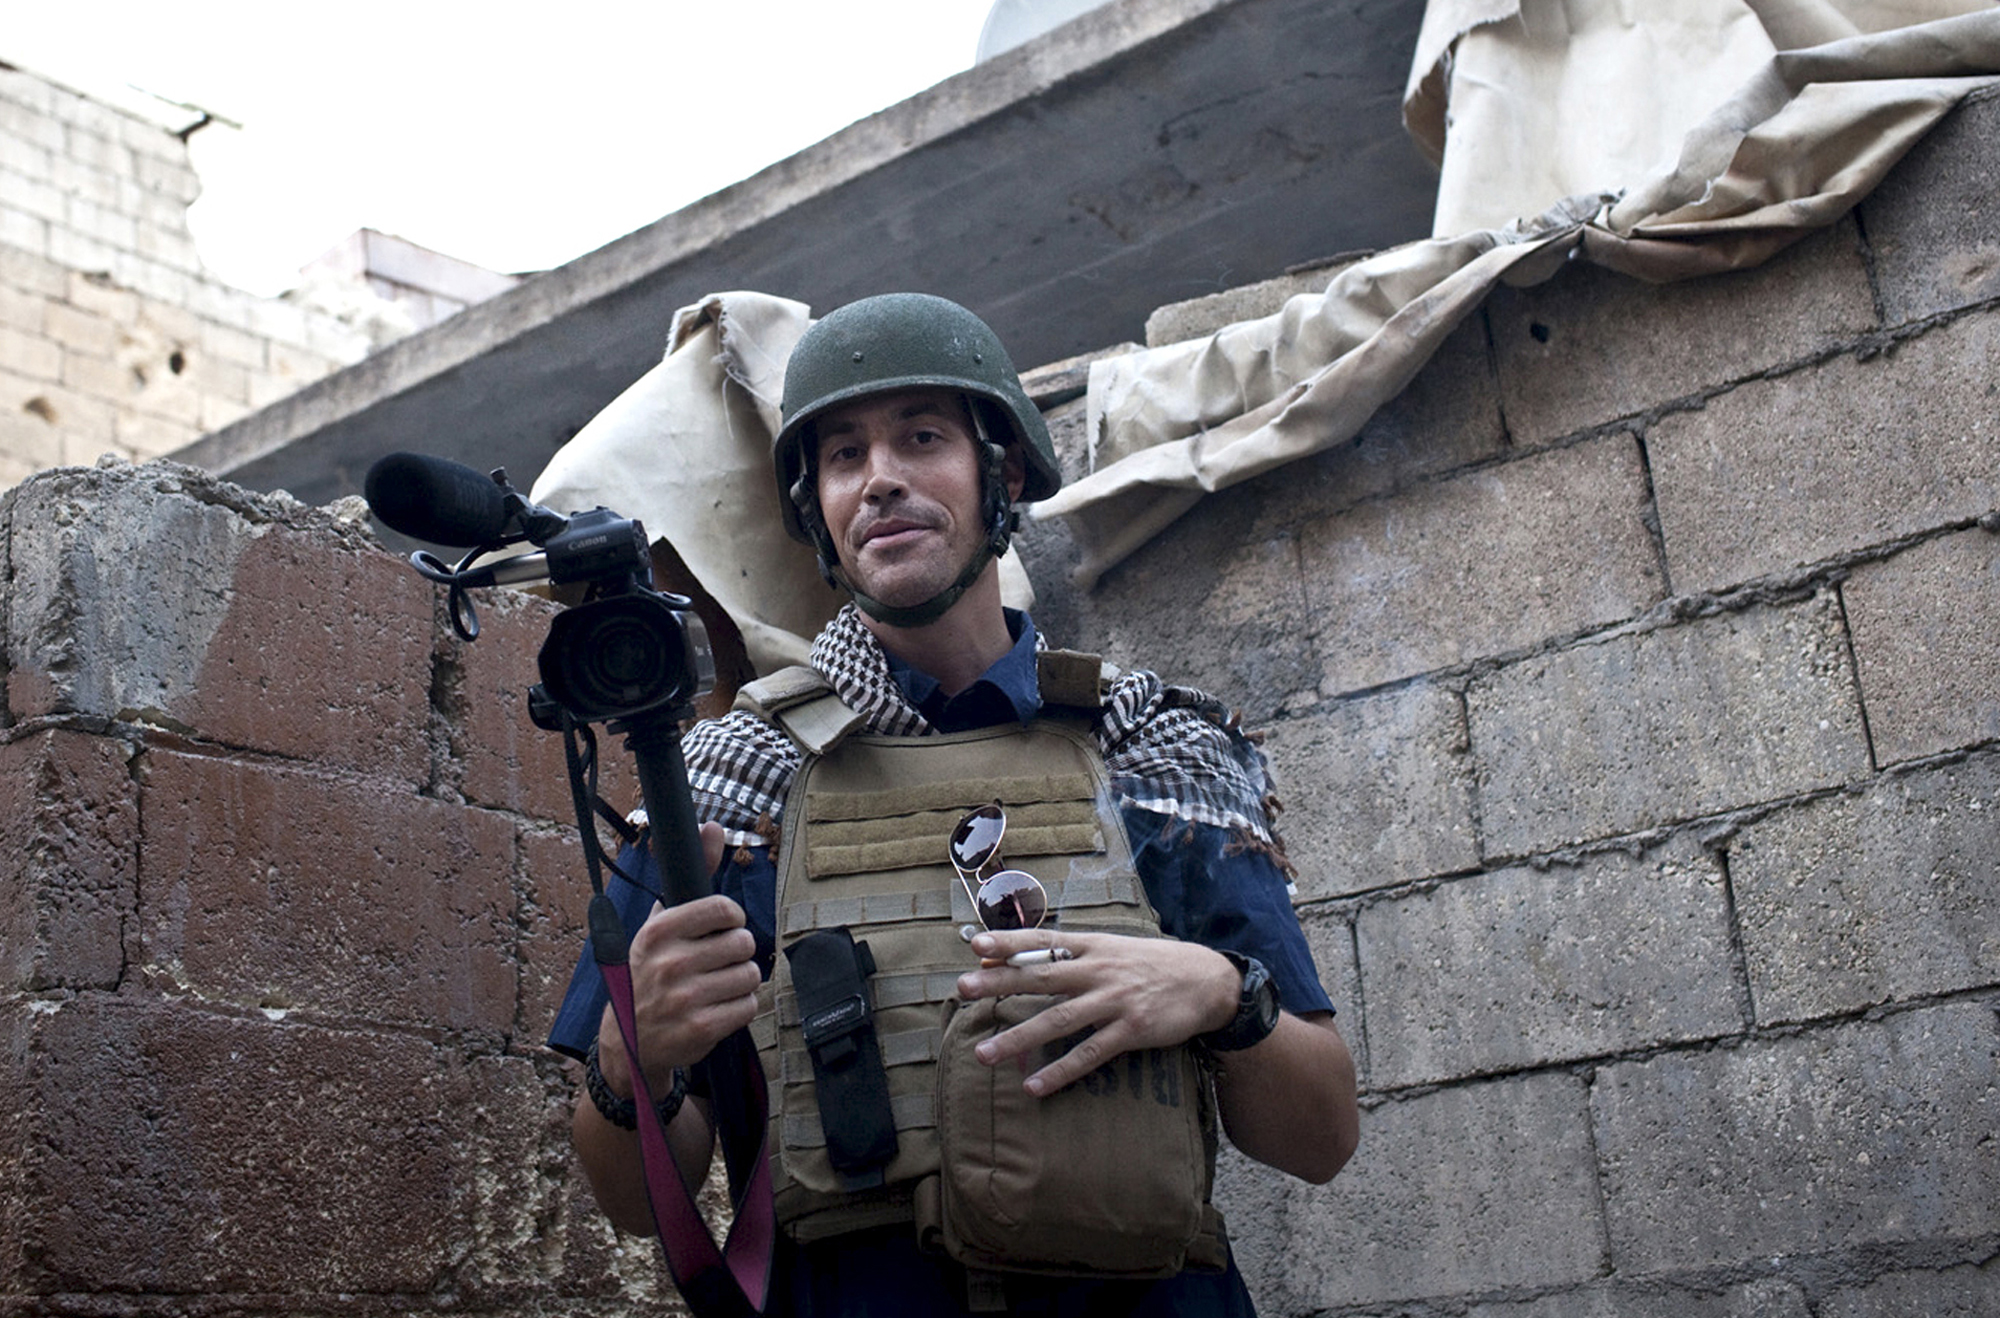 PHOTO: In this Nov. 2012, file photo, posted on the website freejamesfoley.org, shows missing journalist James Foley while covering the civil war in Aleppo, Syria.